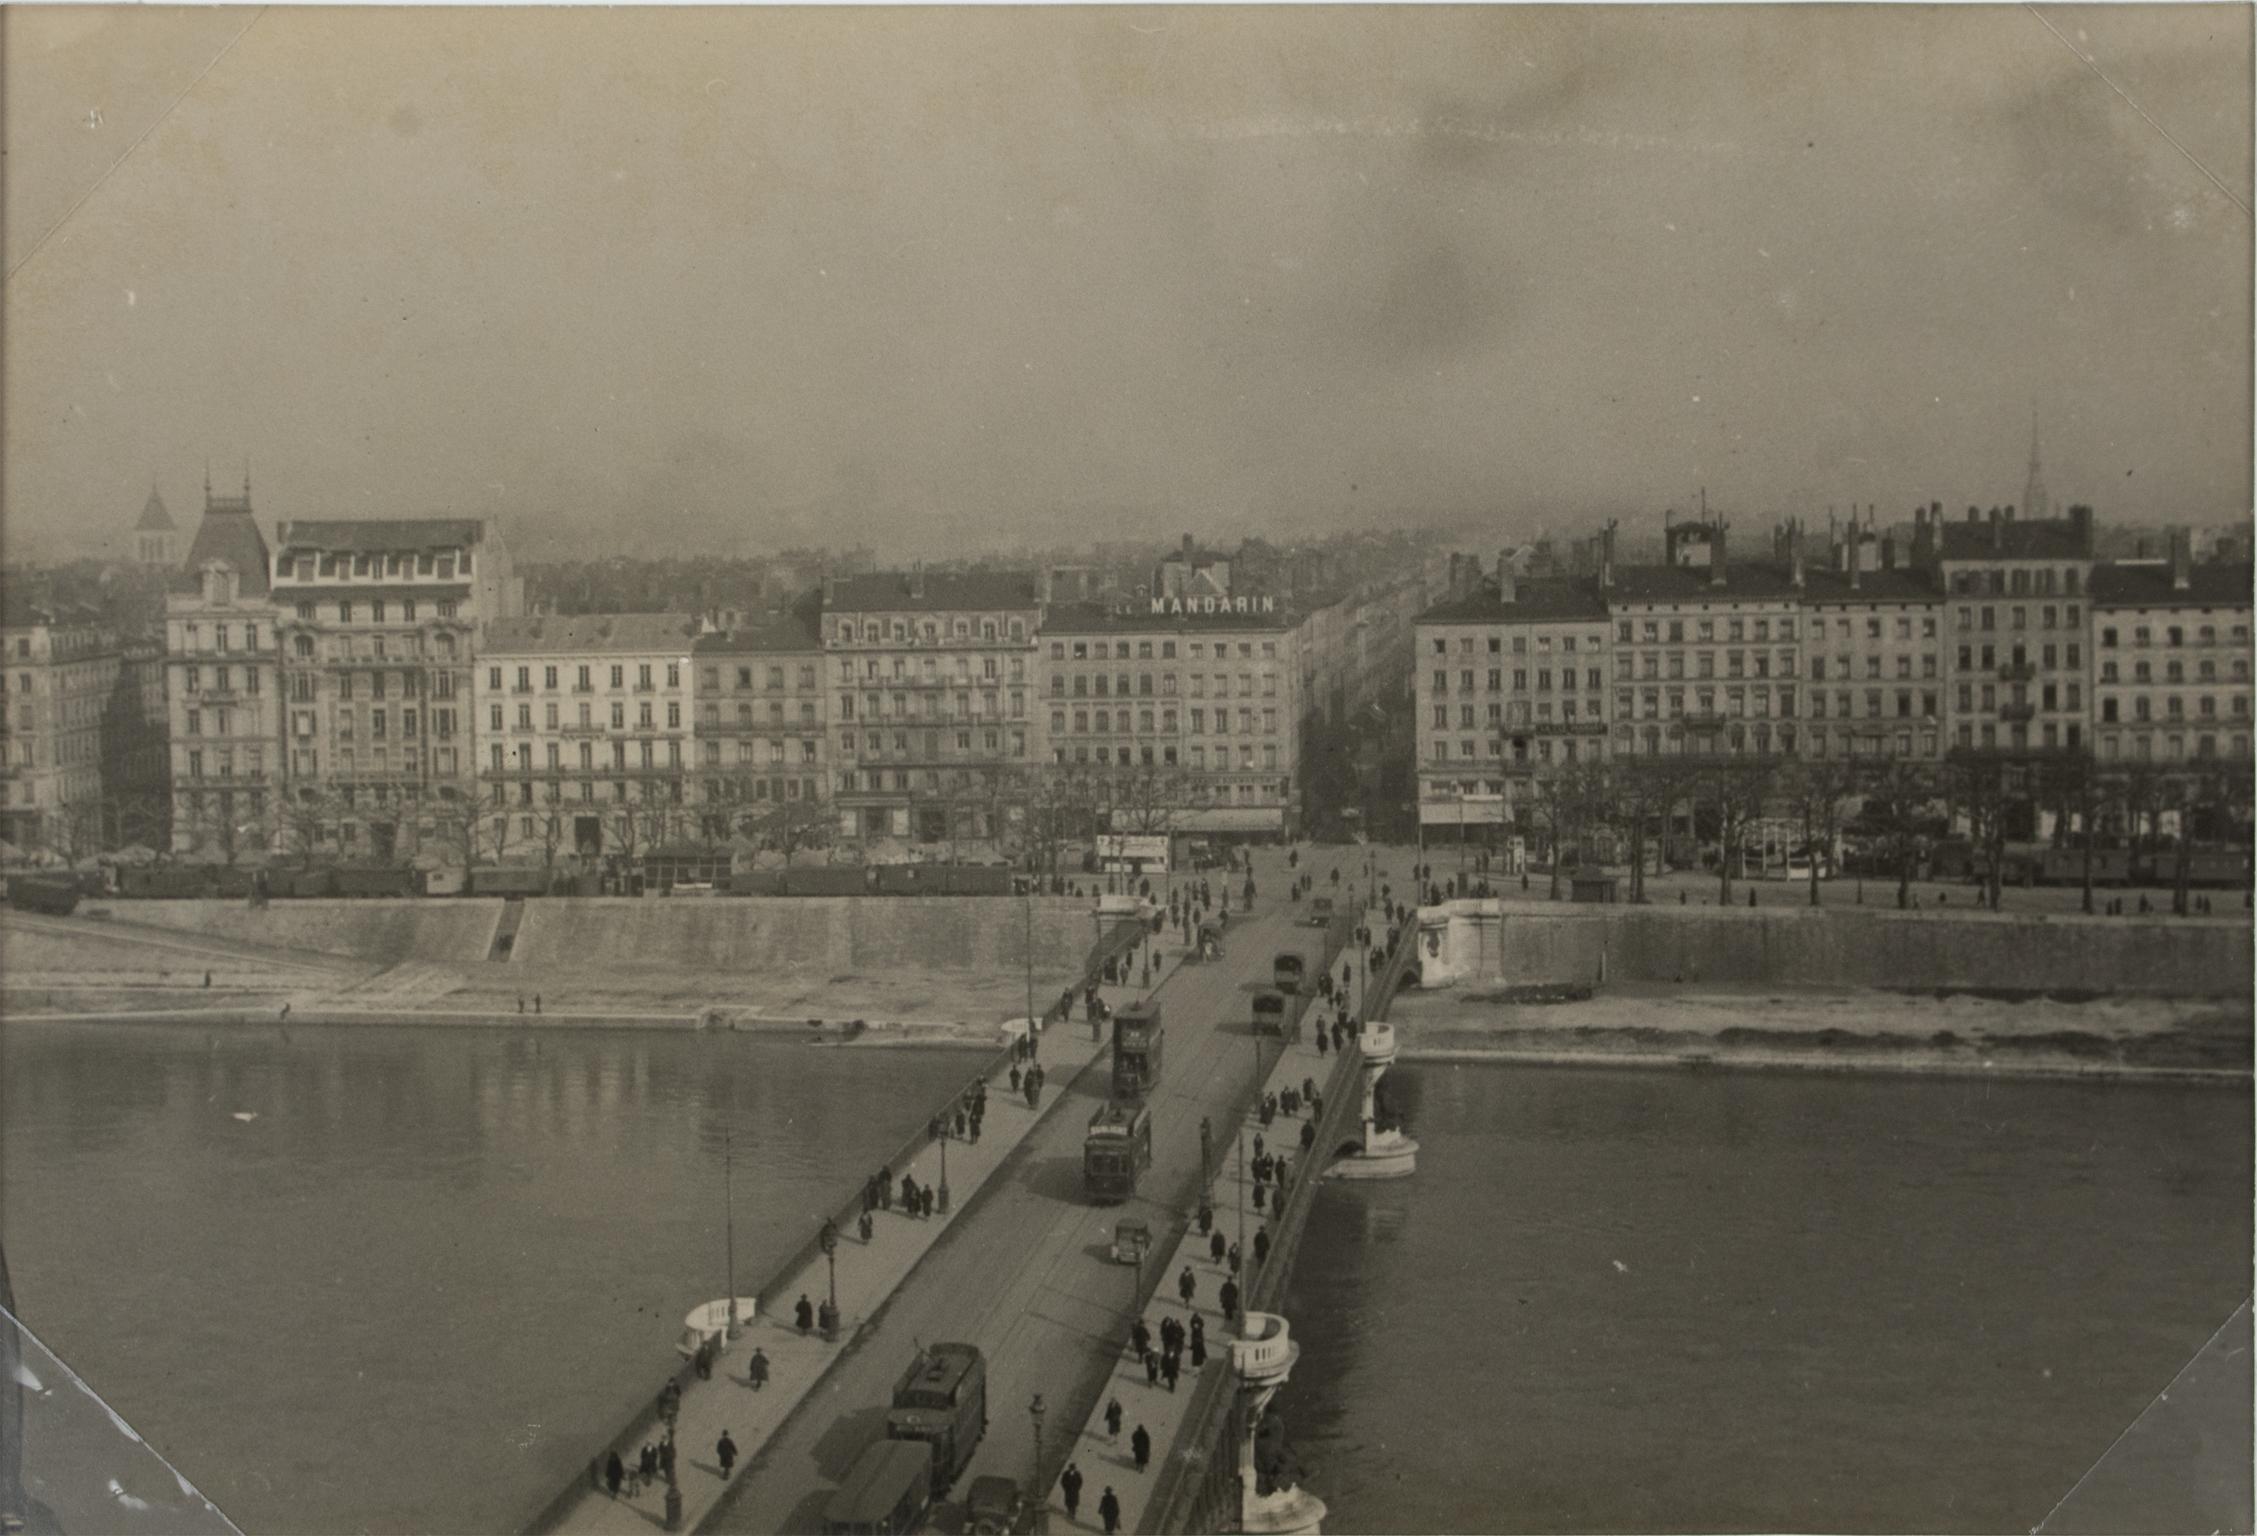 Unknown Landscape Photograph - Lyon, France the Rhone River 1927 - Silver Gelatin Black and White Photography